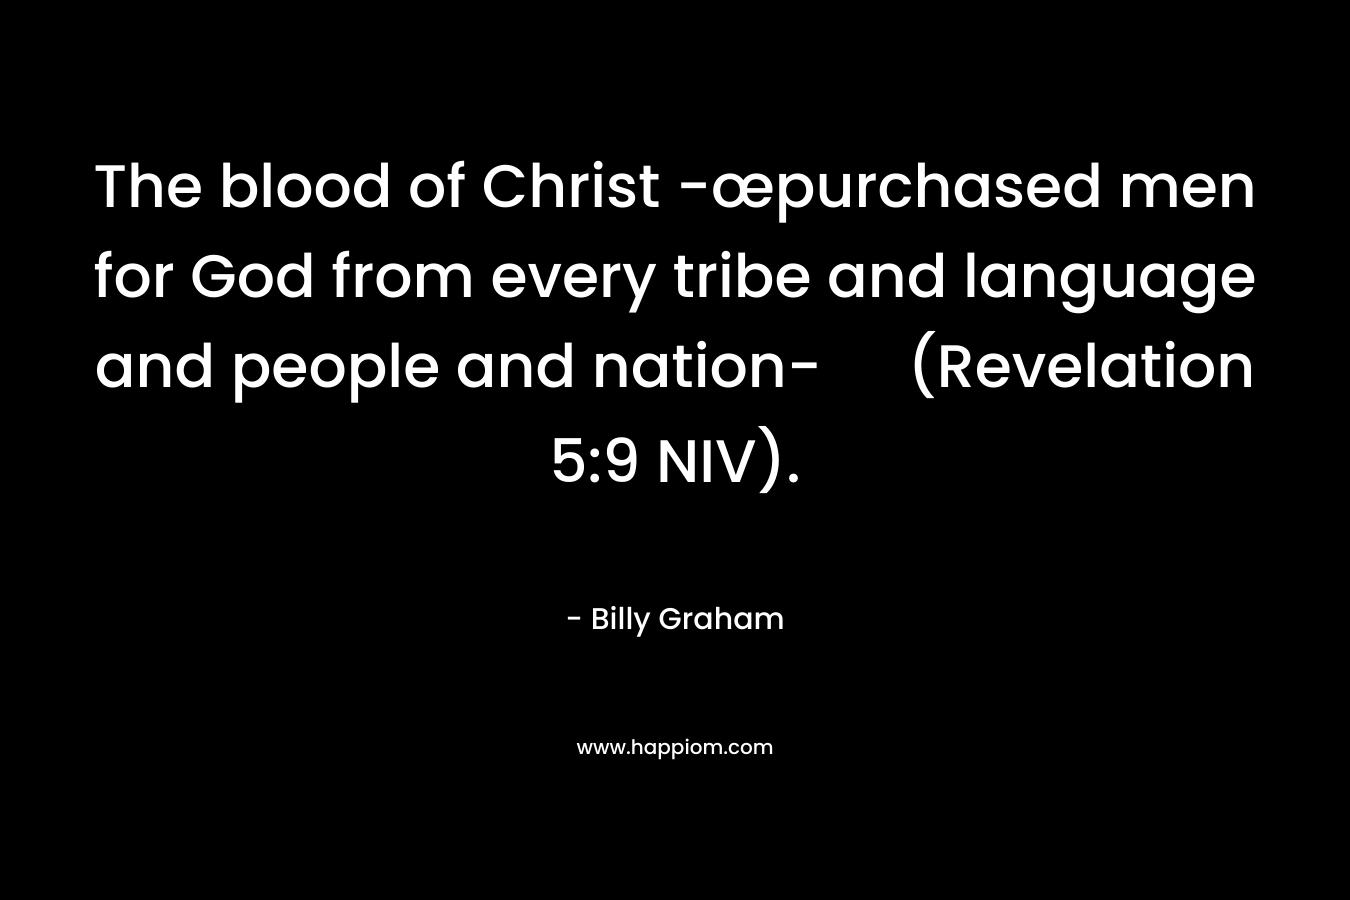 The blood of Christ -œpurchased men for God from every tribe and language and people and nation- (Revelation 5:9 NIV). – Billy Graham